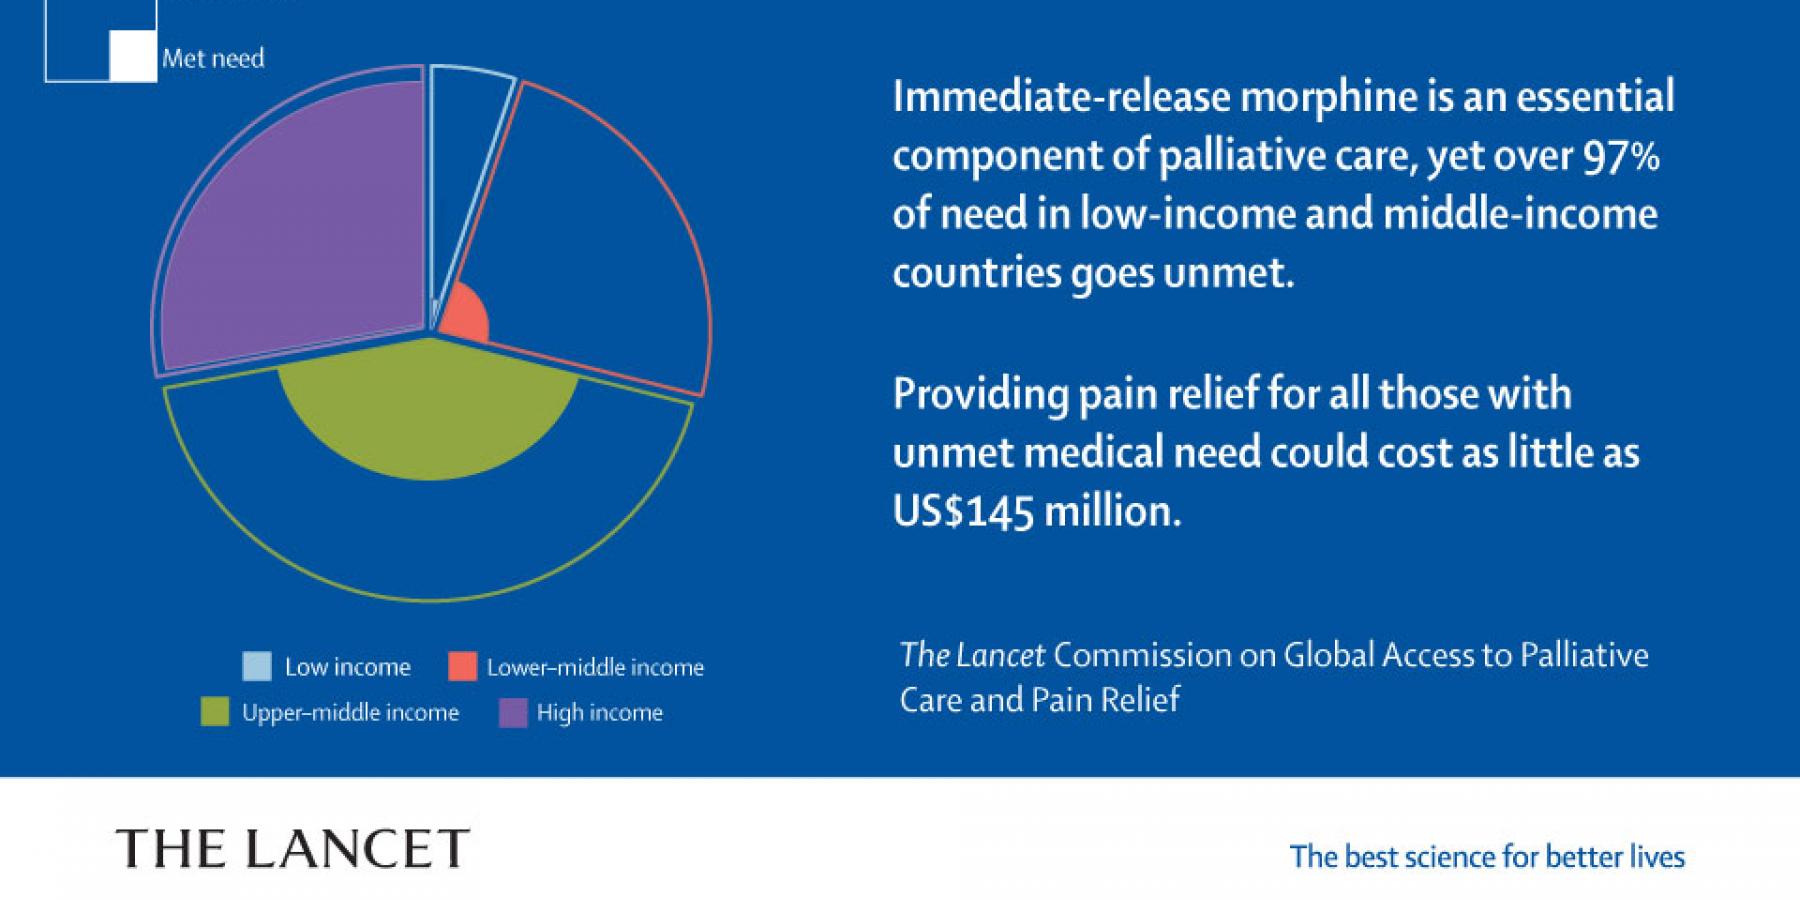 Graphic showing how the unmet need for pain relief is centred on low- and mid-income countries